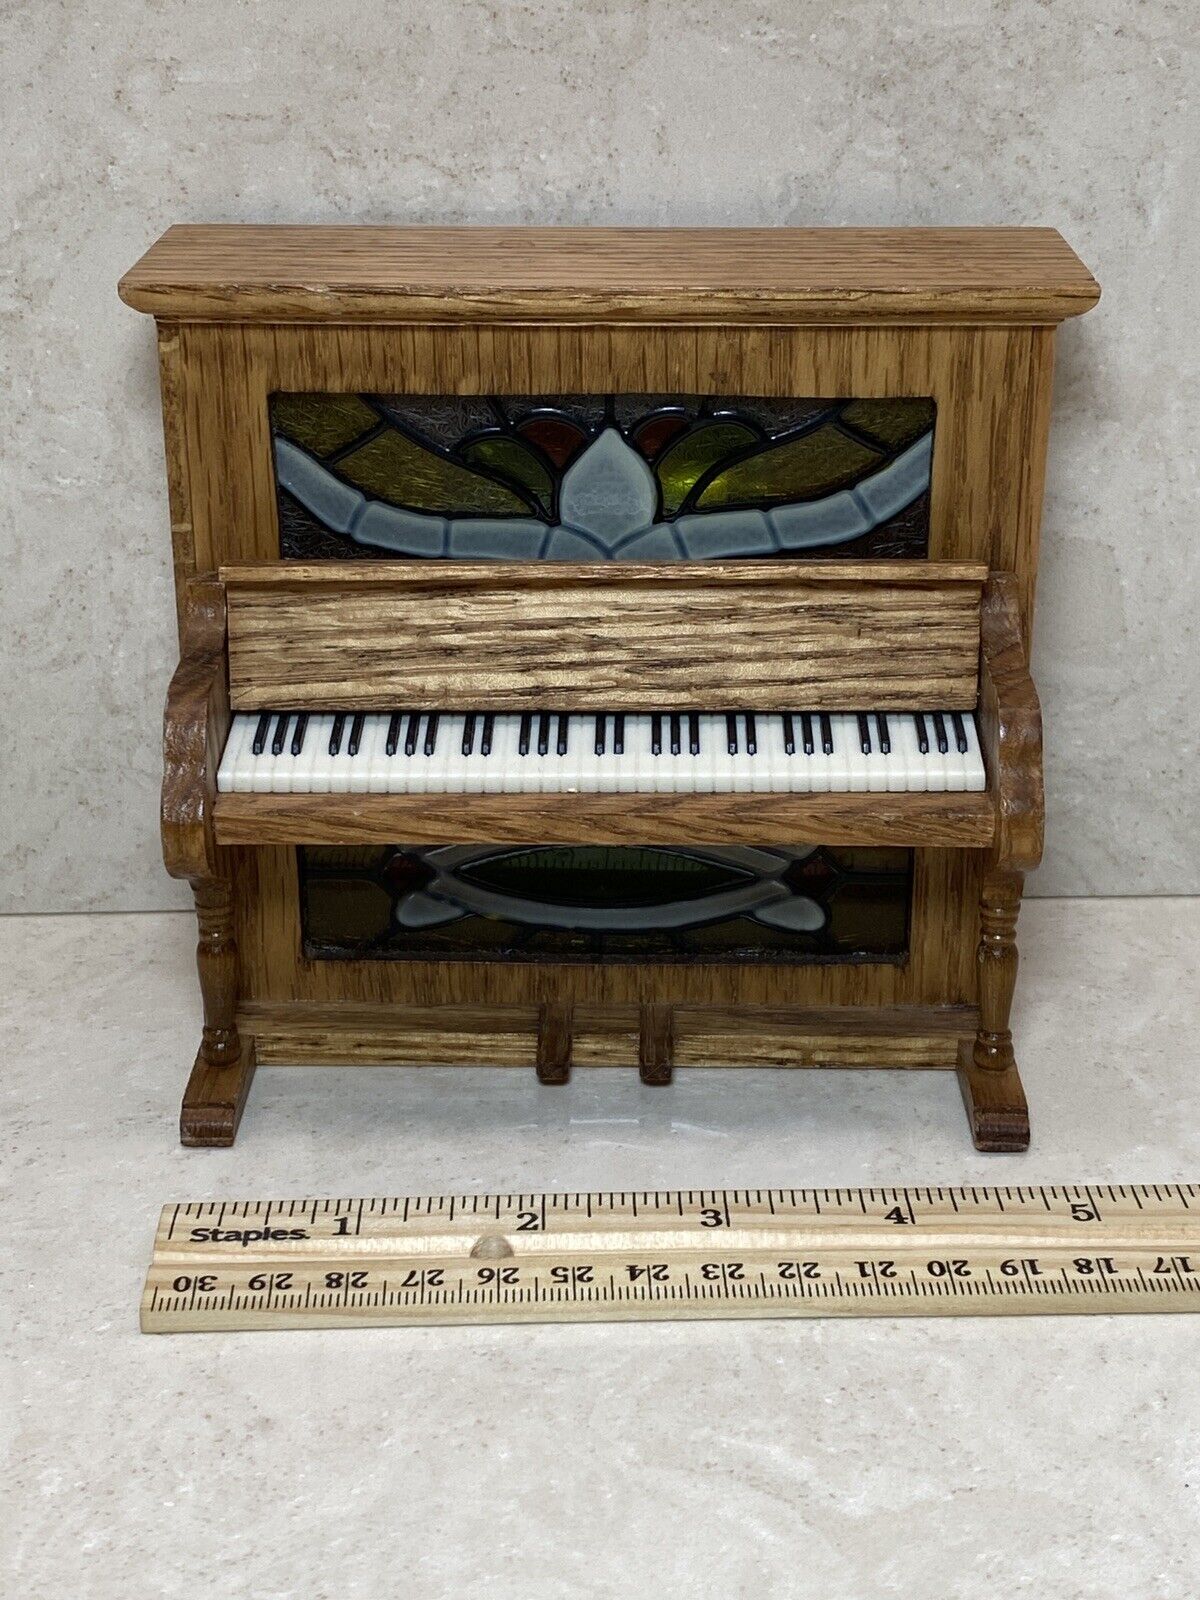 Vintage Simson Mini Wood Piano Music Box Stained Glass Look Made in Taiwan